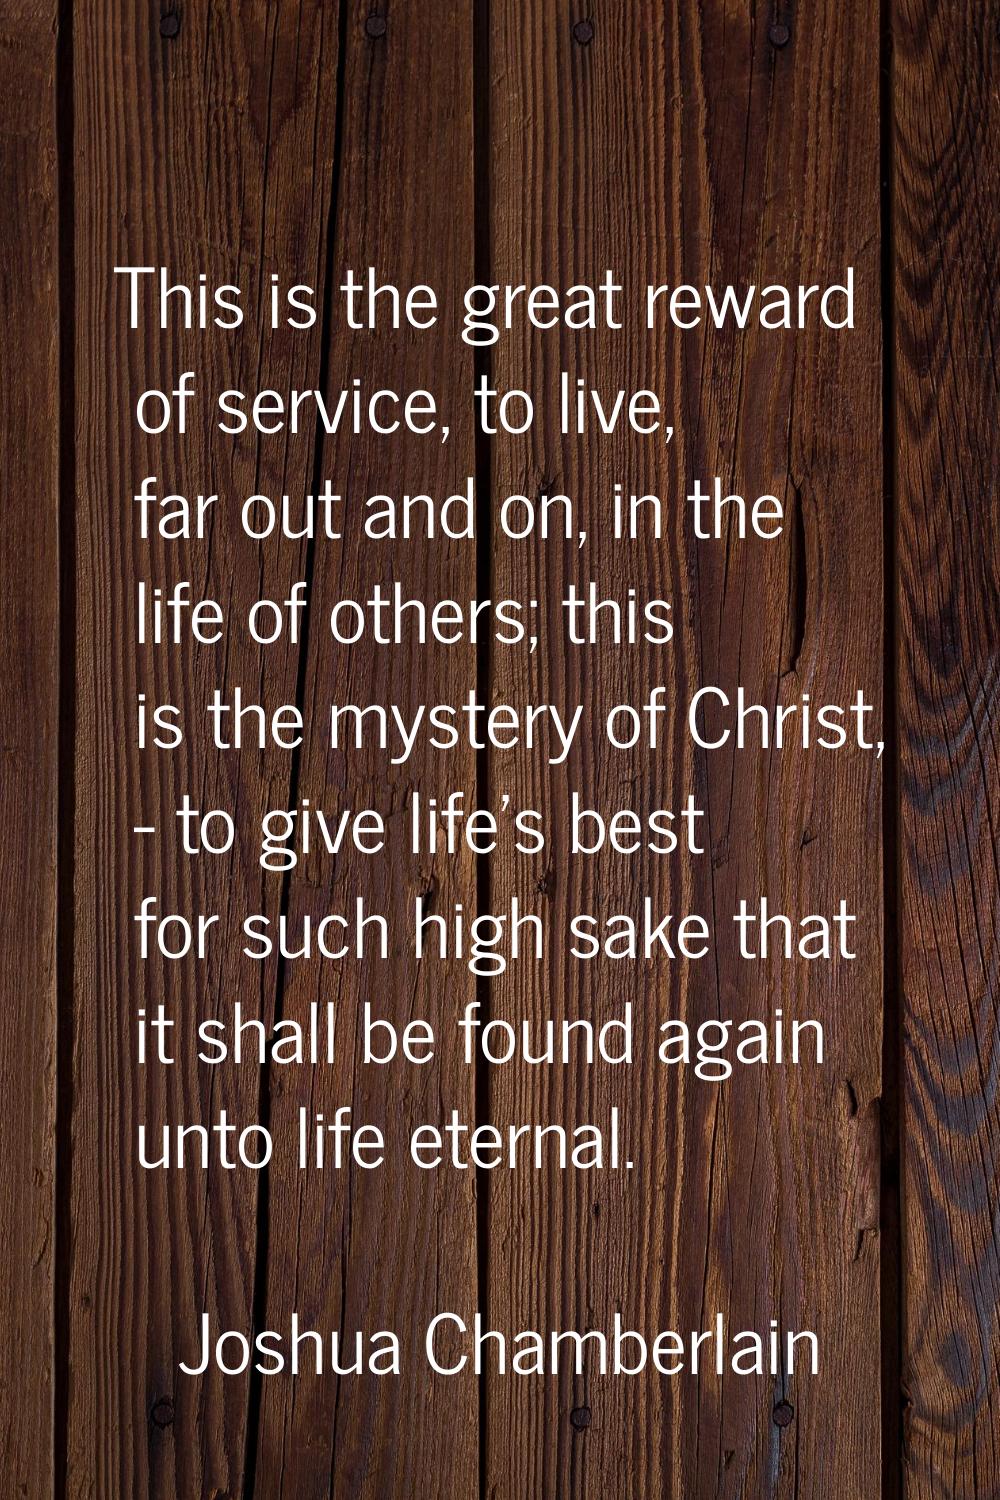 This is the great reward of service, to live, far out and on, in the life of others; this is the my